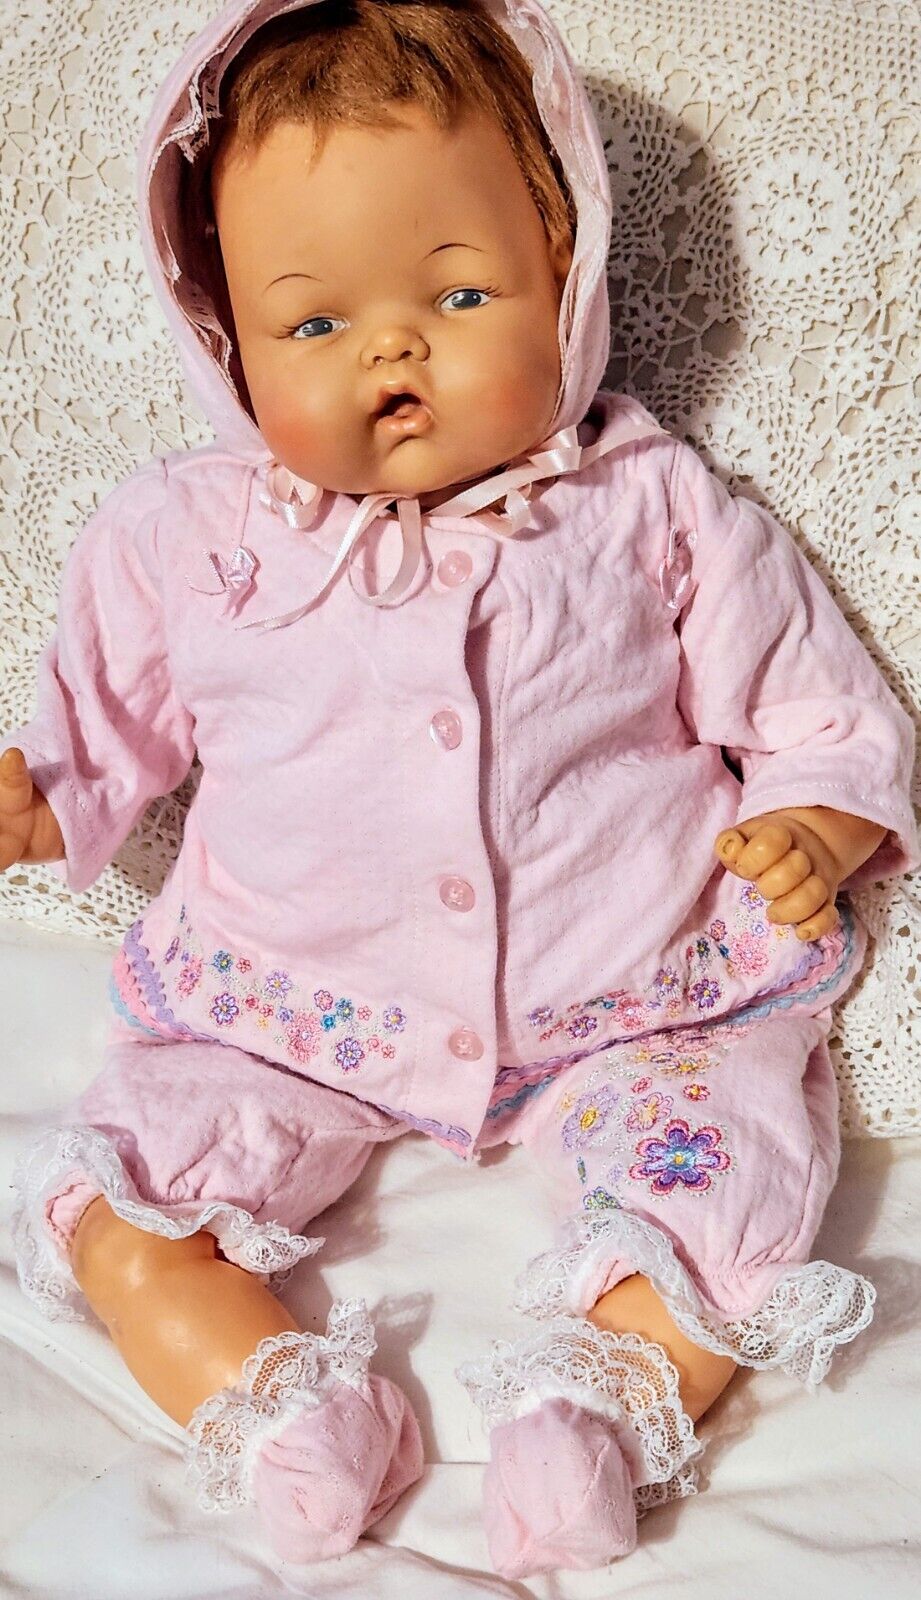 Cute Outfit Jacket Romper Bonnet Booties For Thumbelina Baby Dear 18-20\